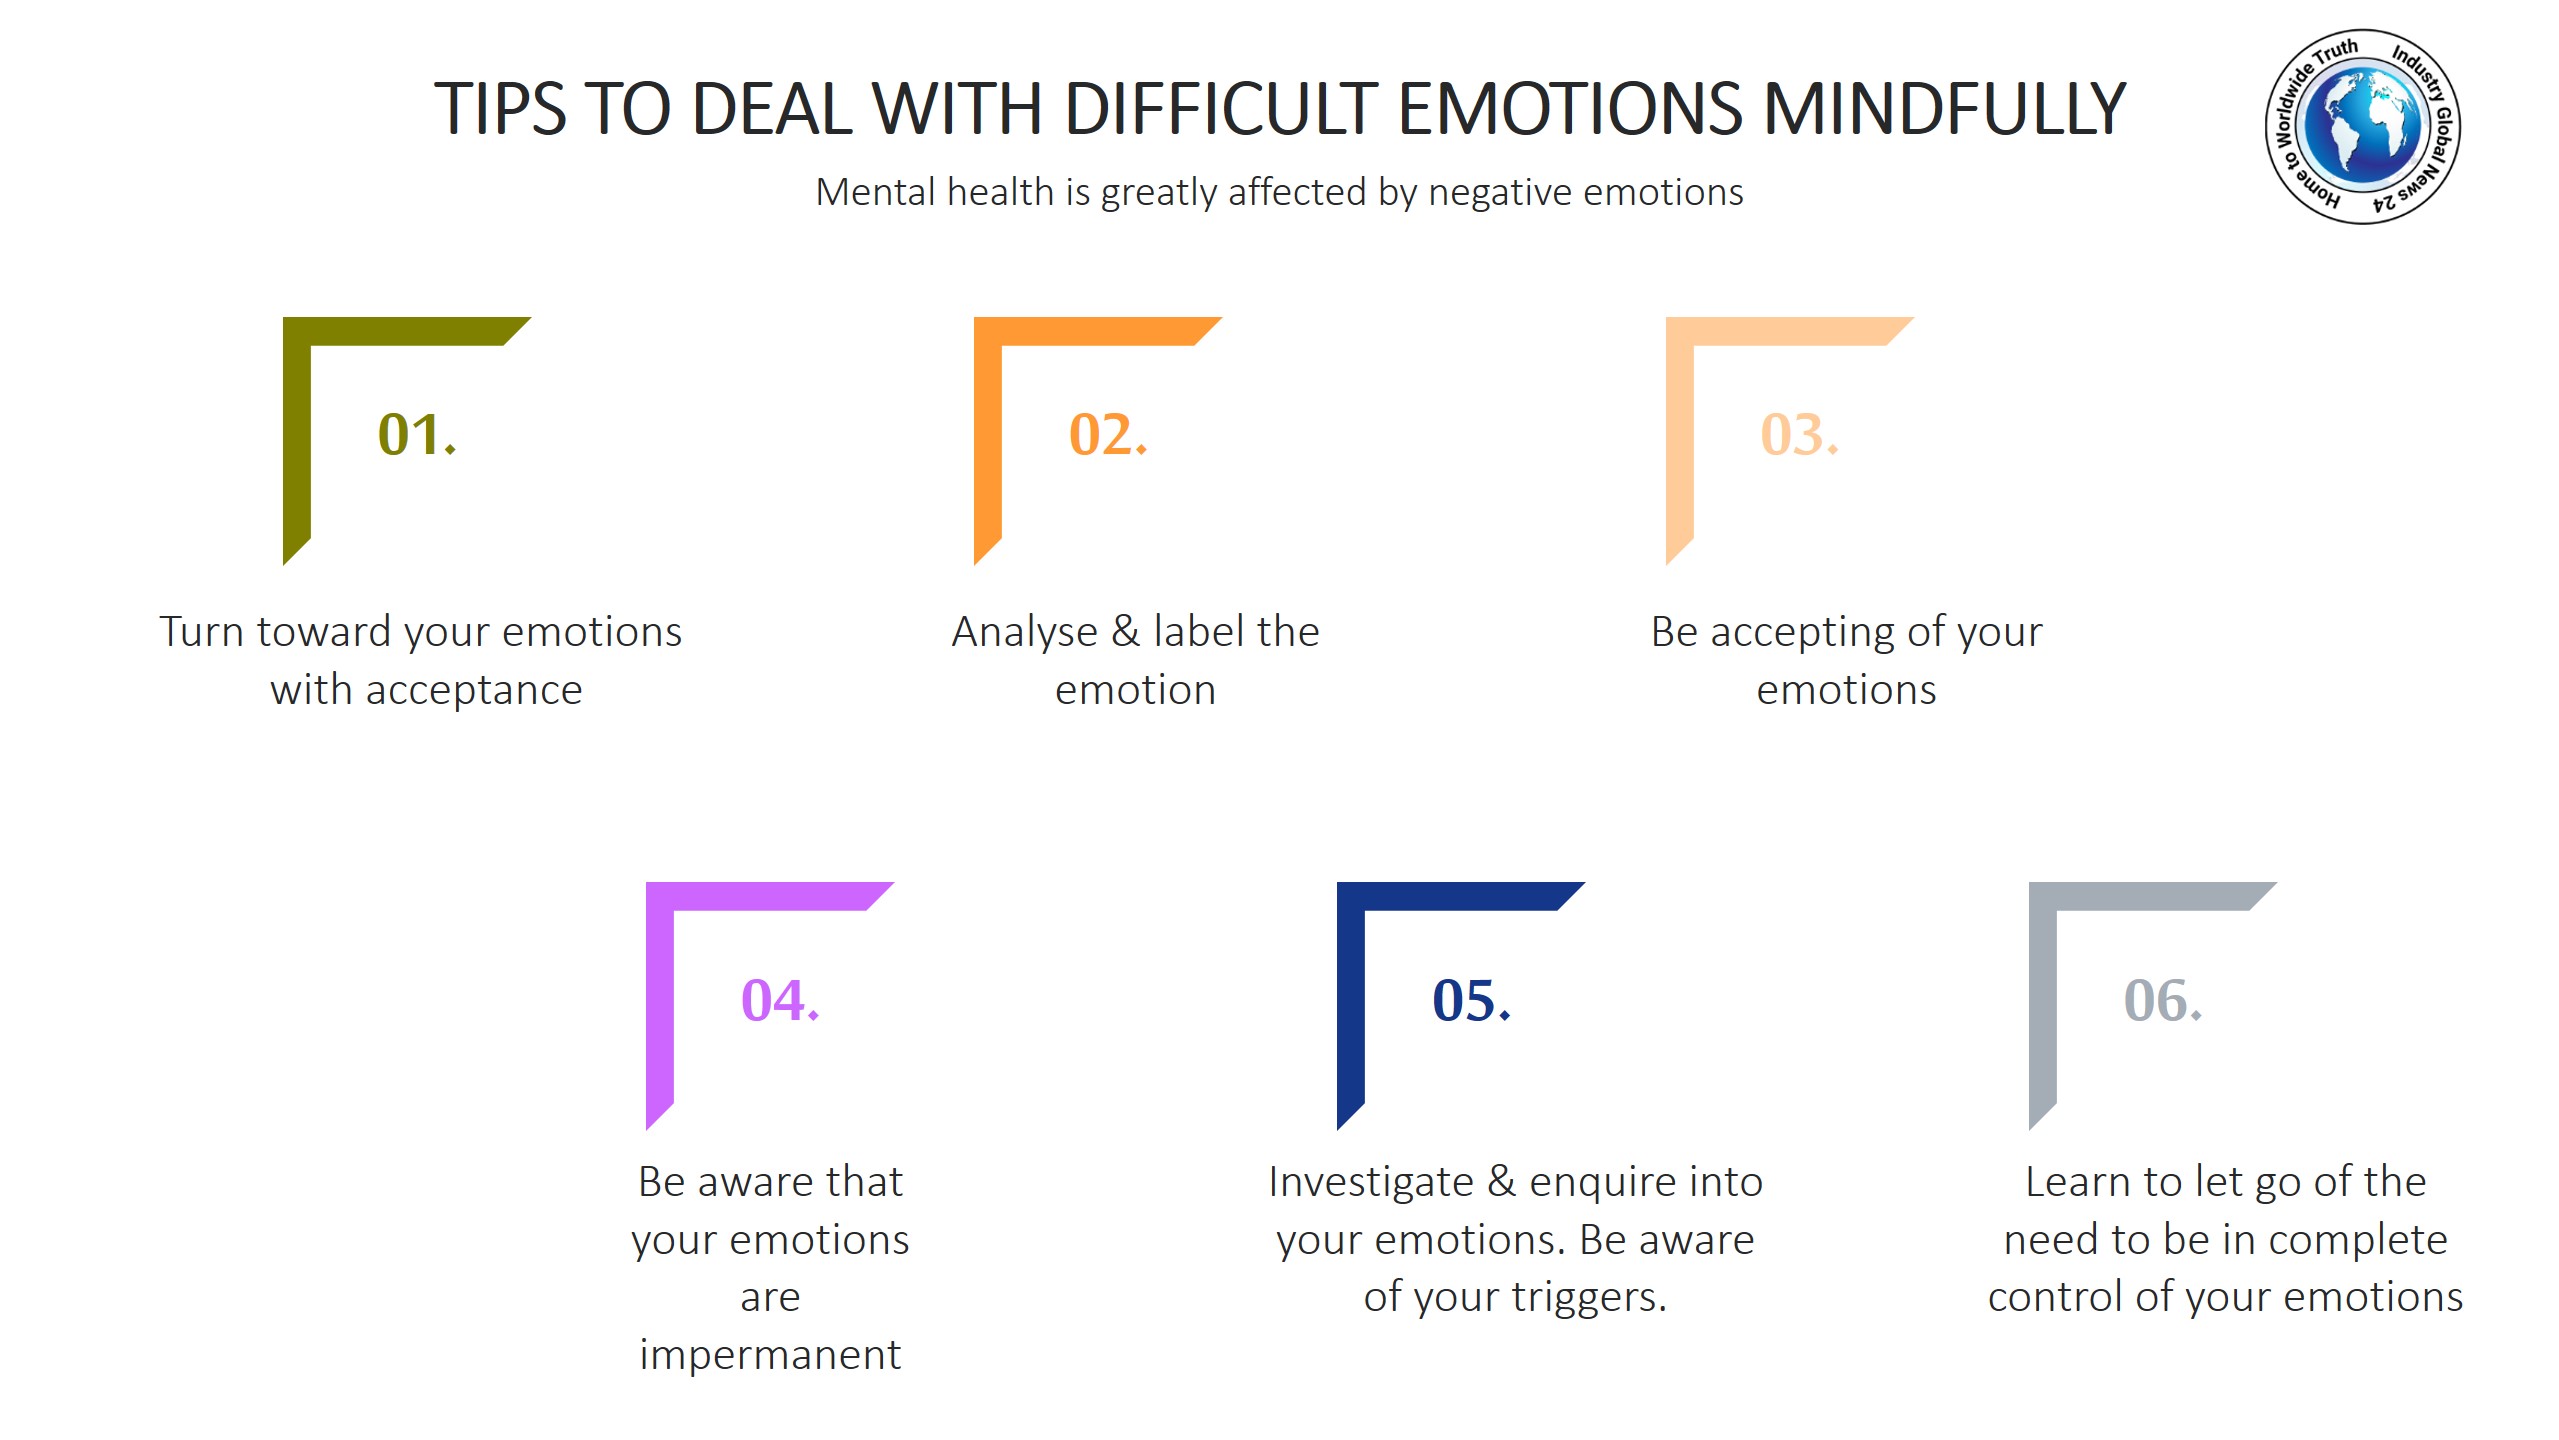 Tips to deal with difficult emotions mindfully